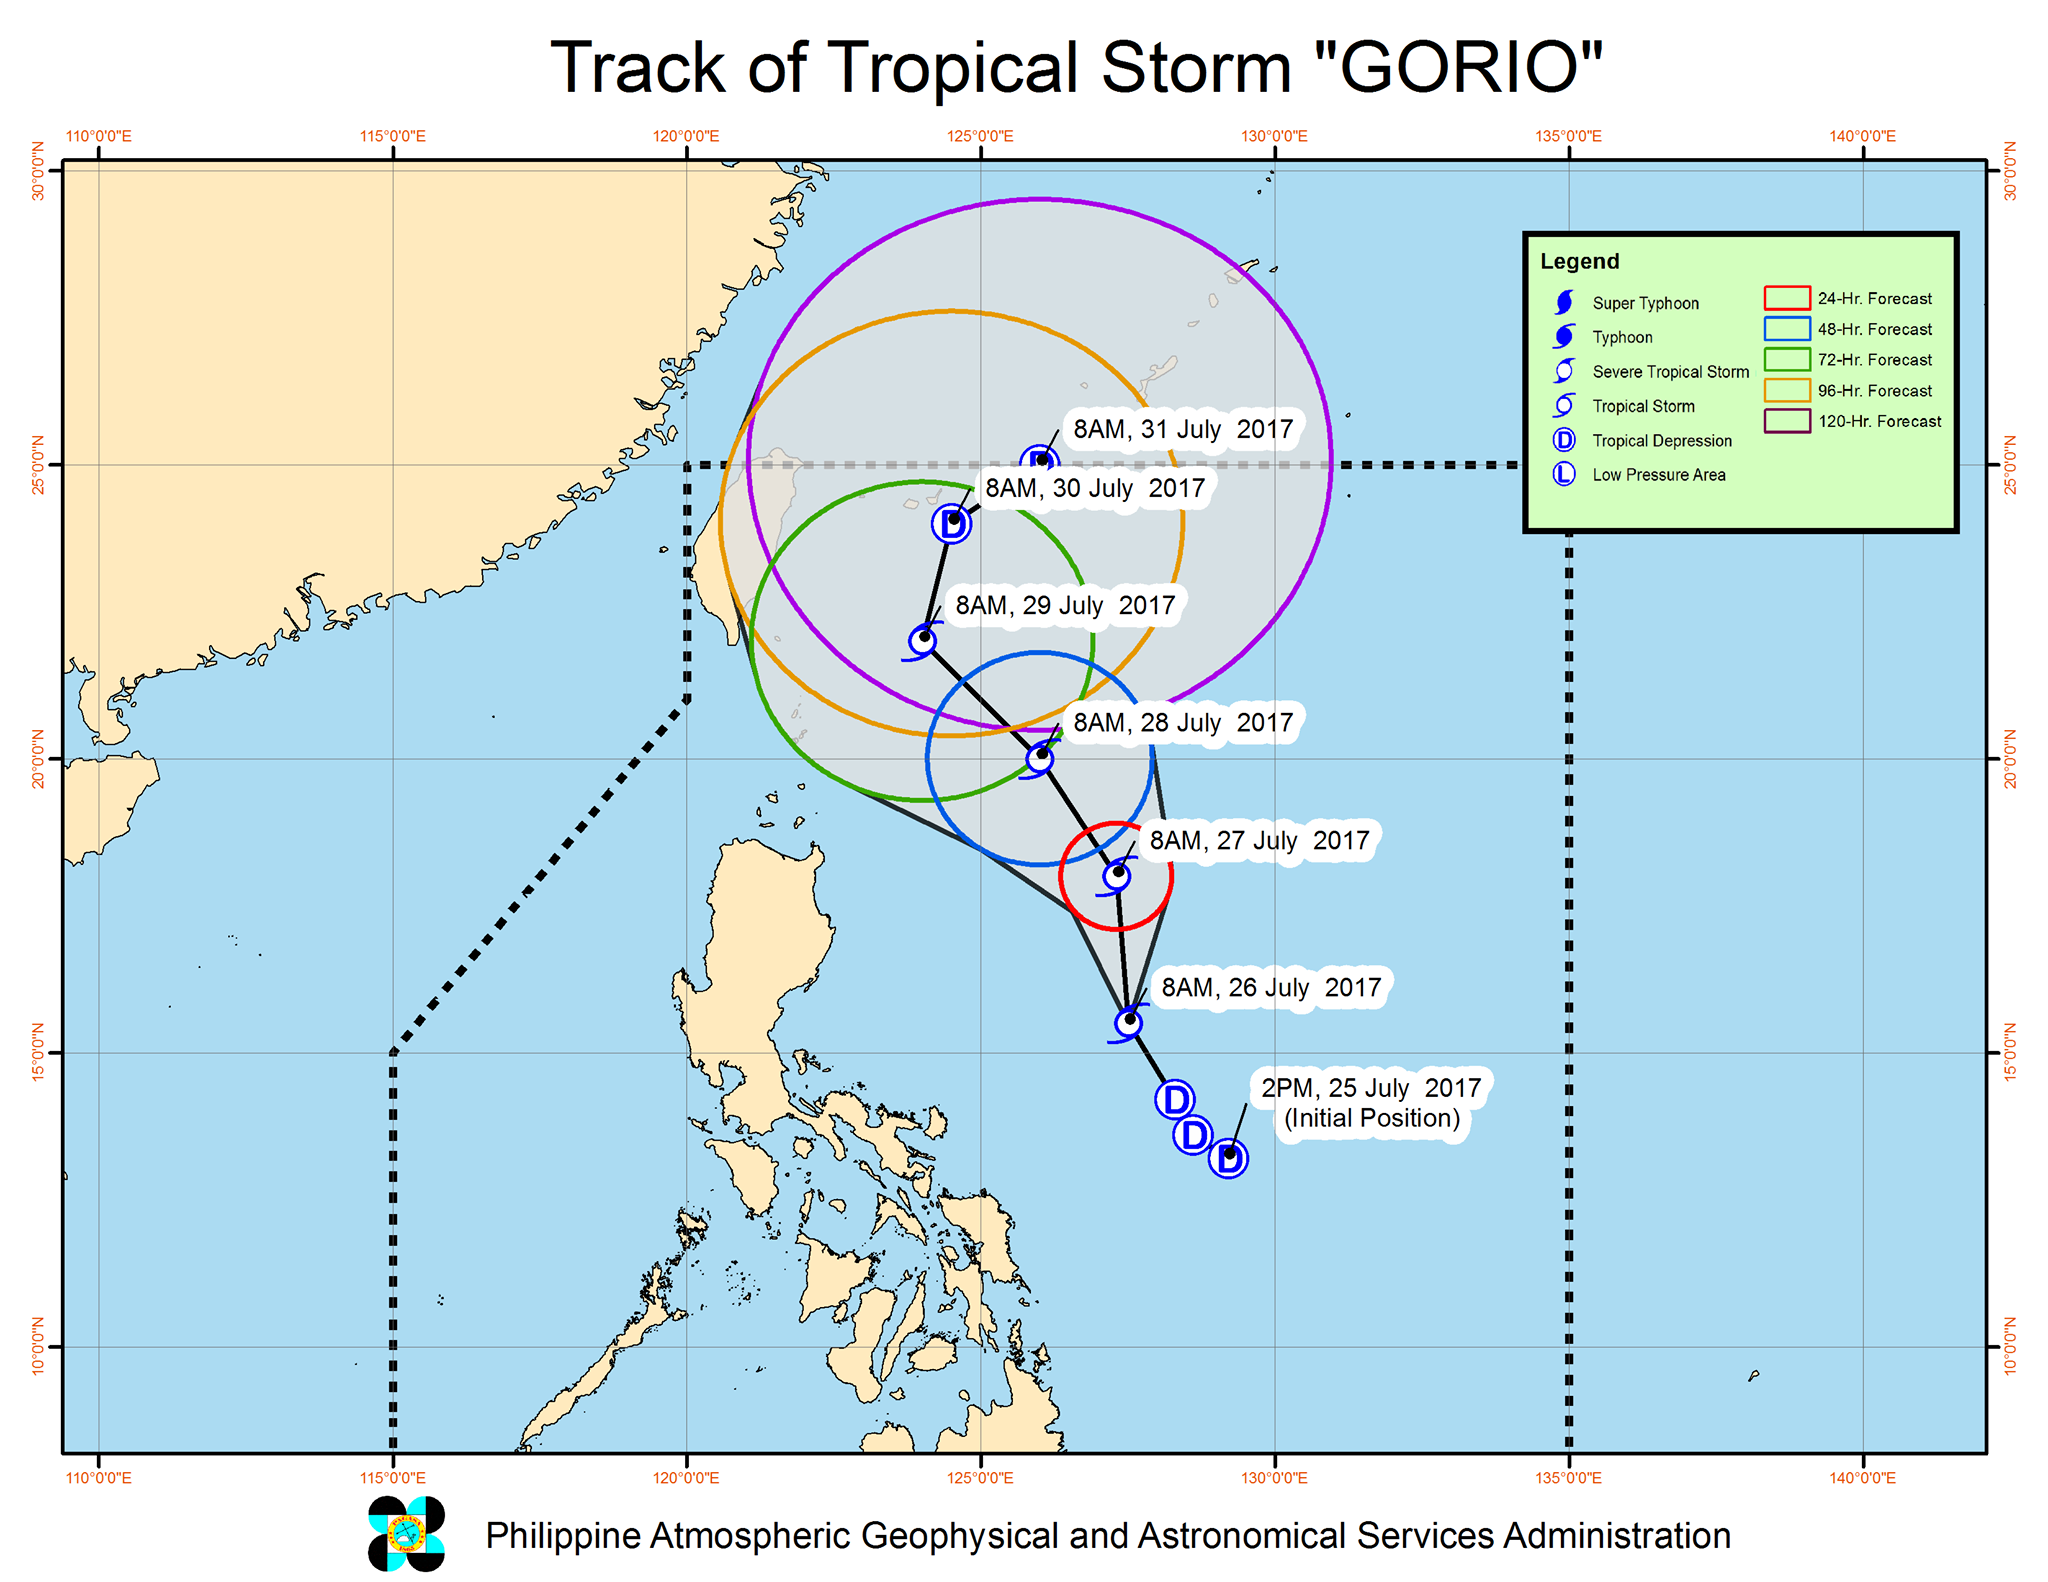 Image from DOST_PAGASA